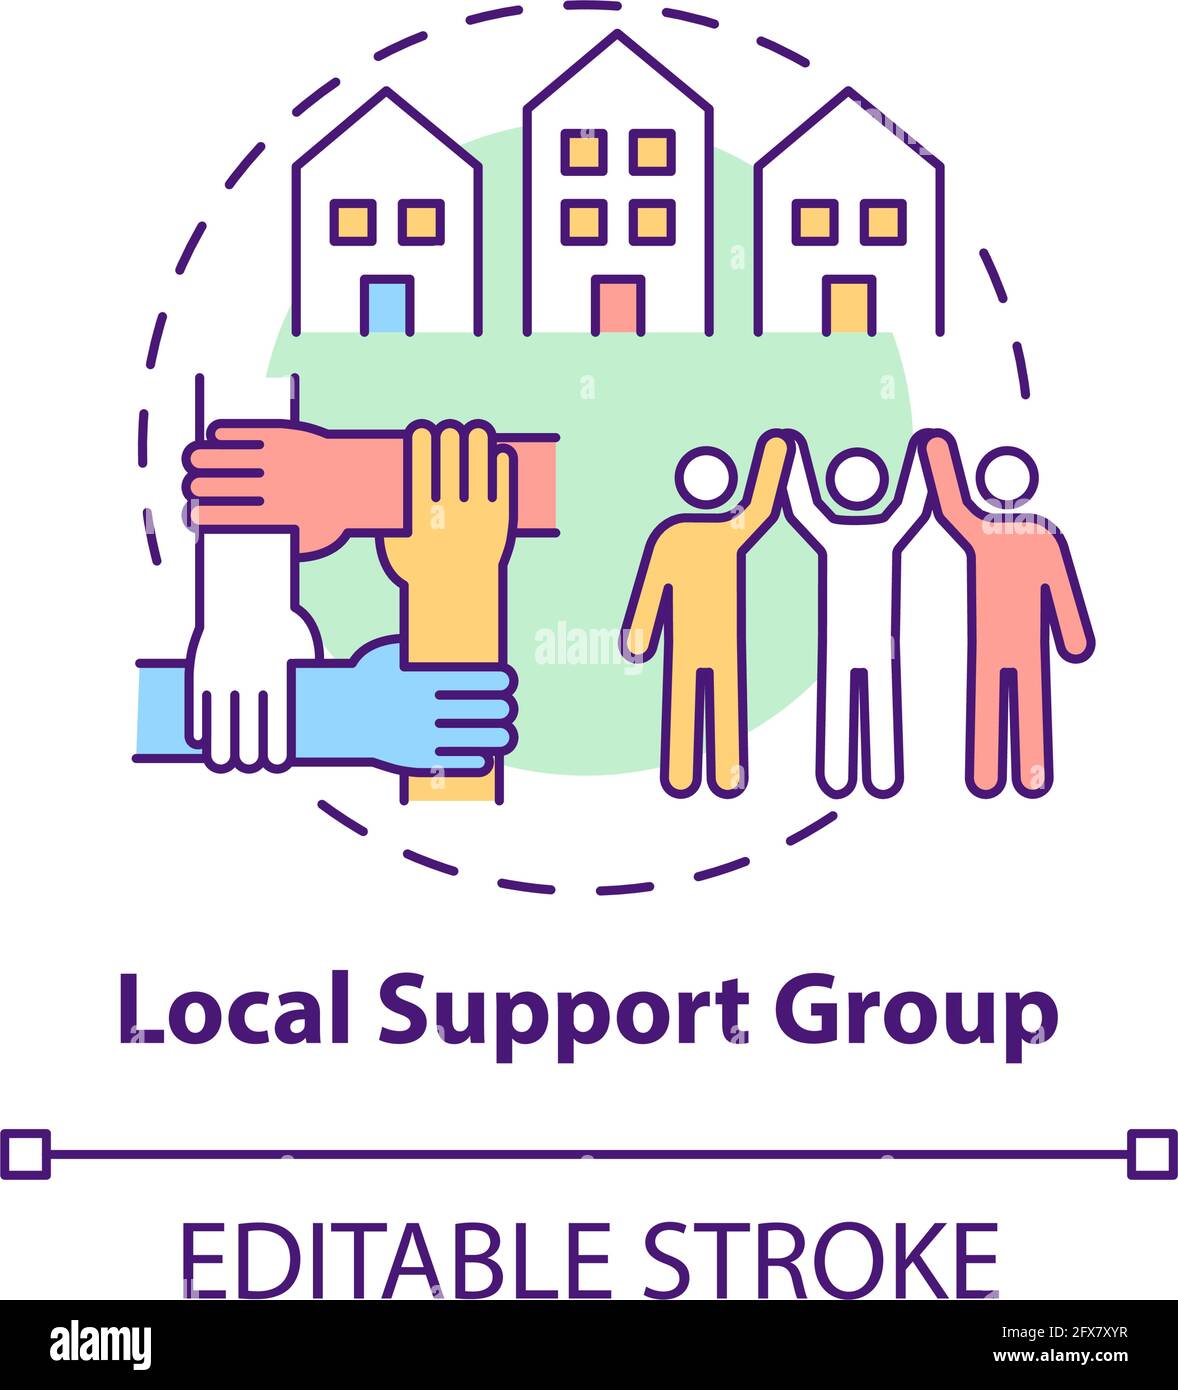 Local support group concept icon Stock Vector